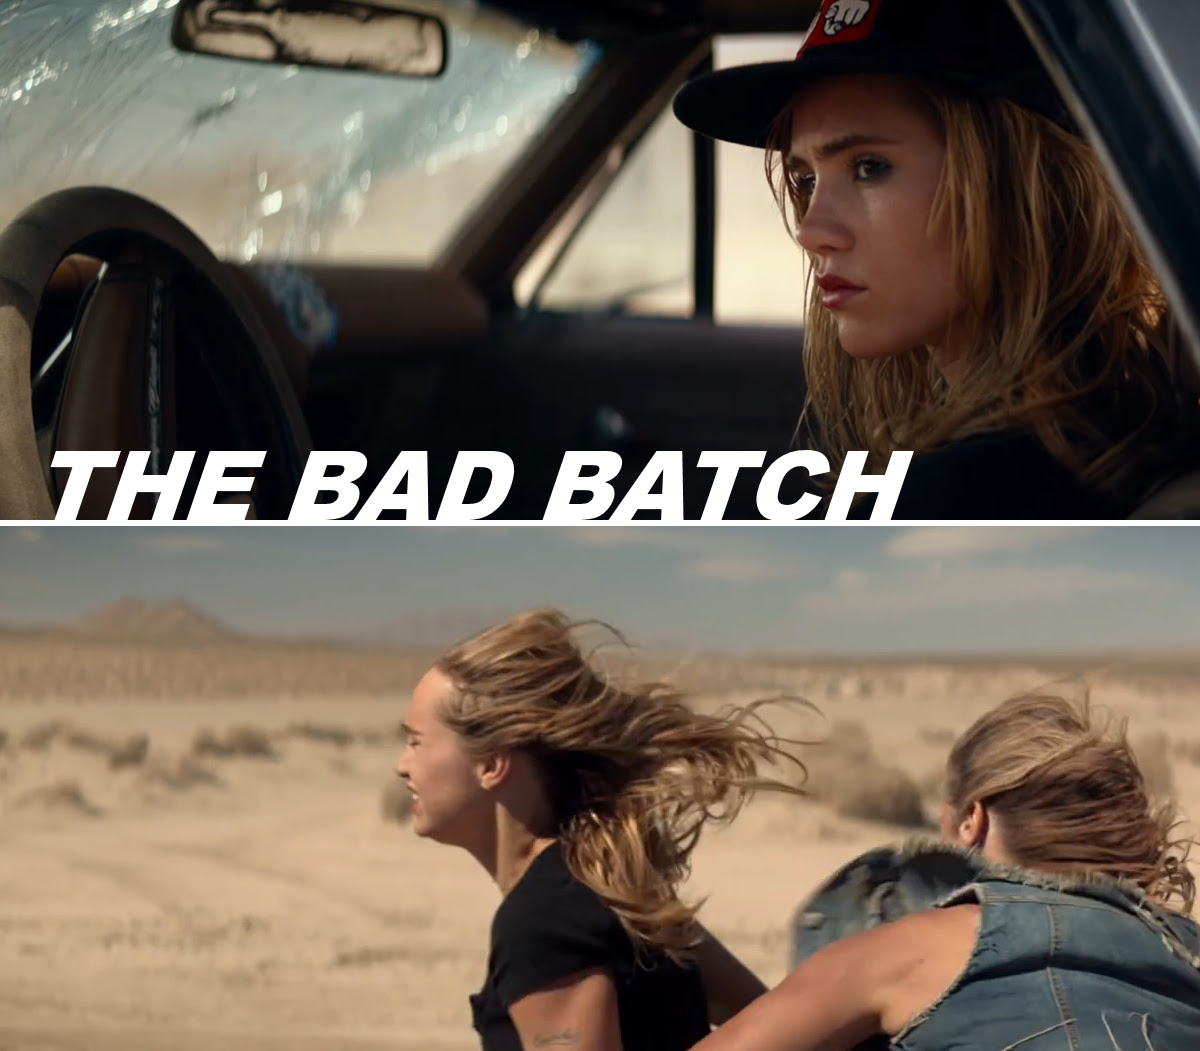 The Bad Batch Jim Carrey The Bad Batch Is A 2016 American Dystopian Thriller Film Directed And